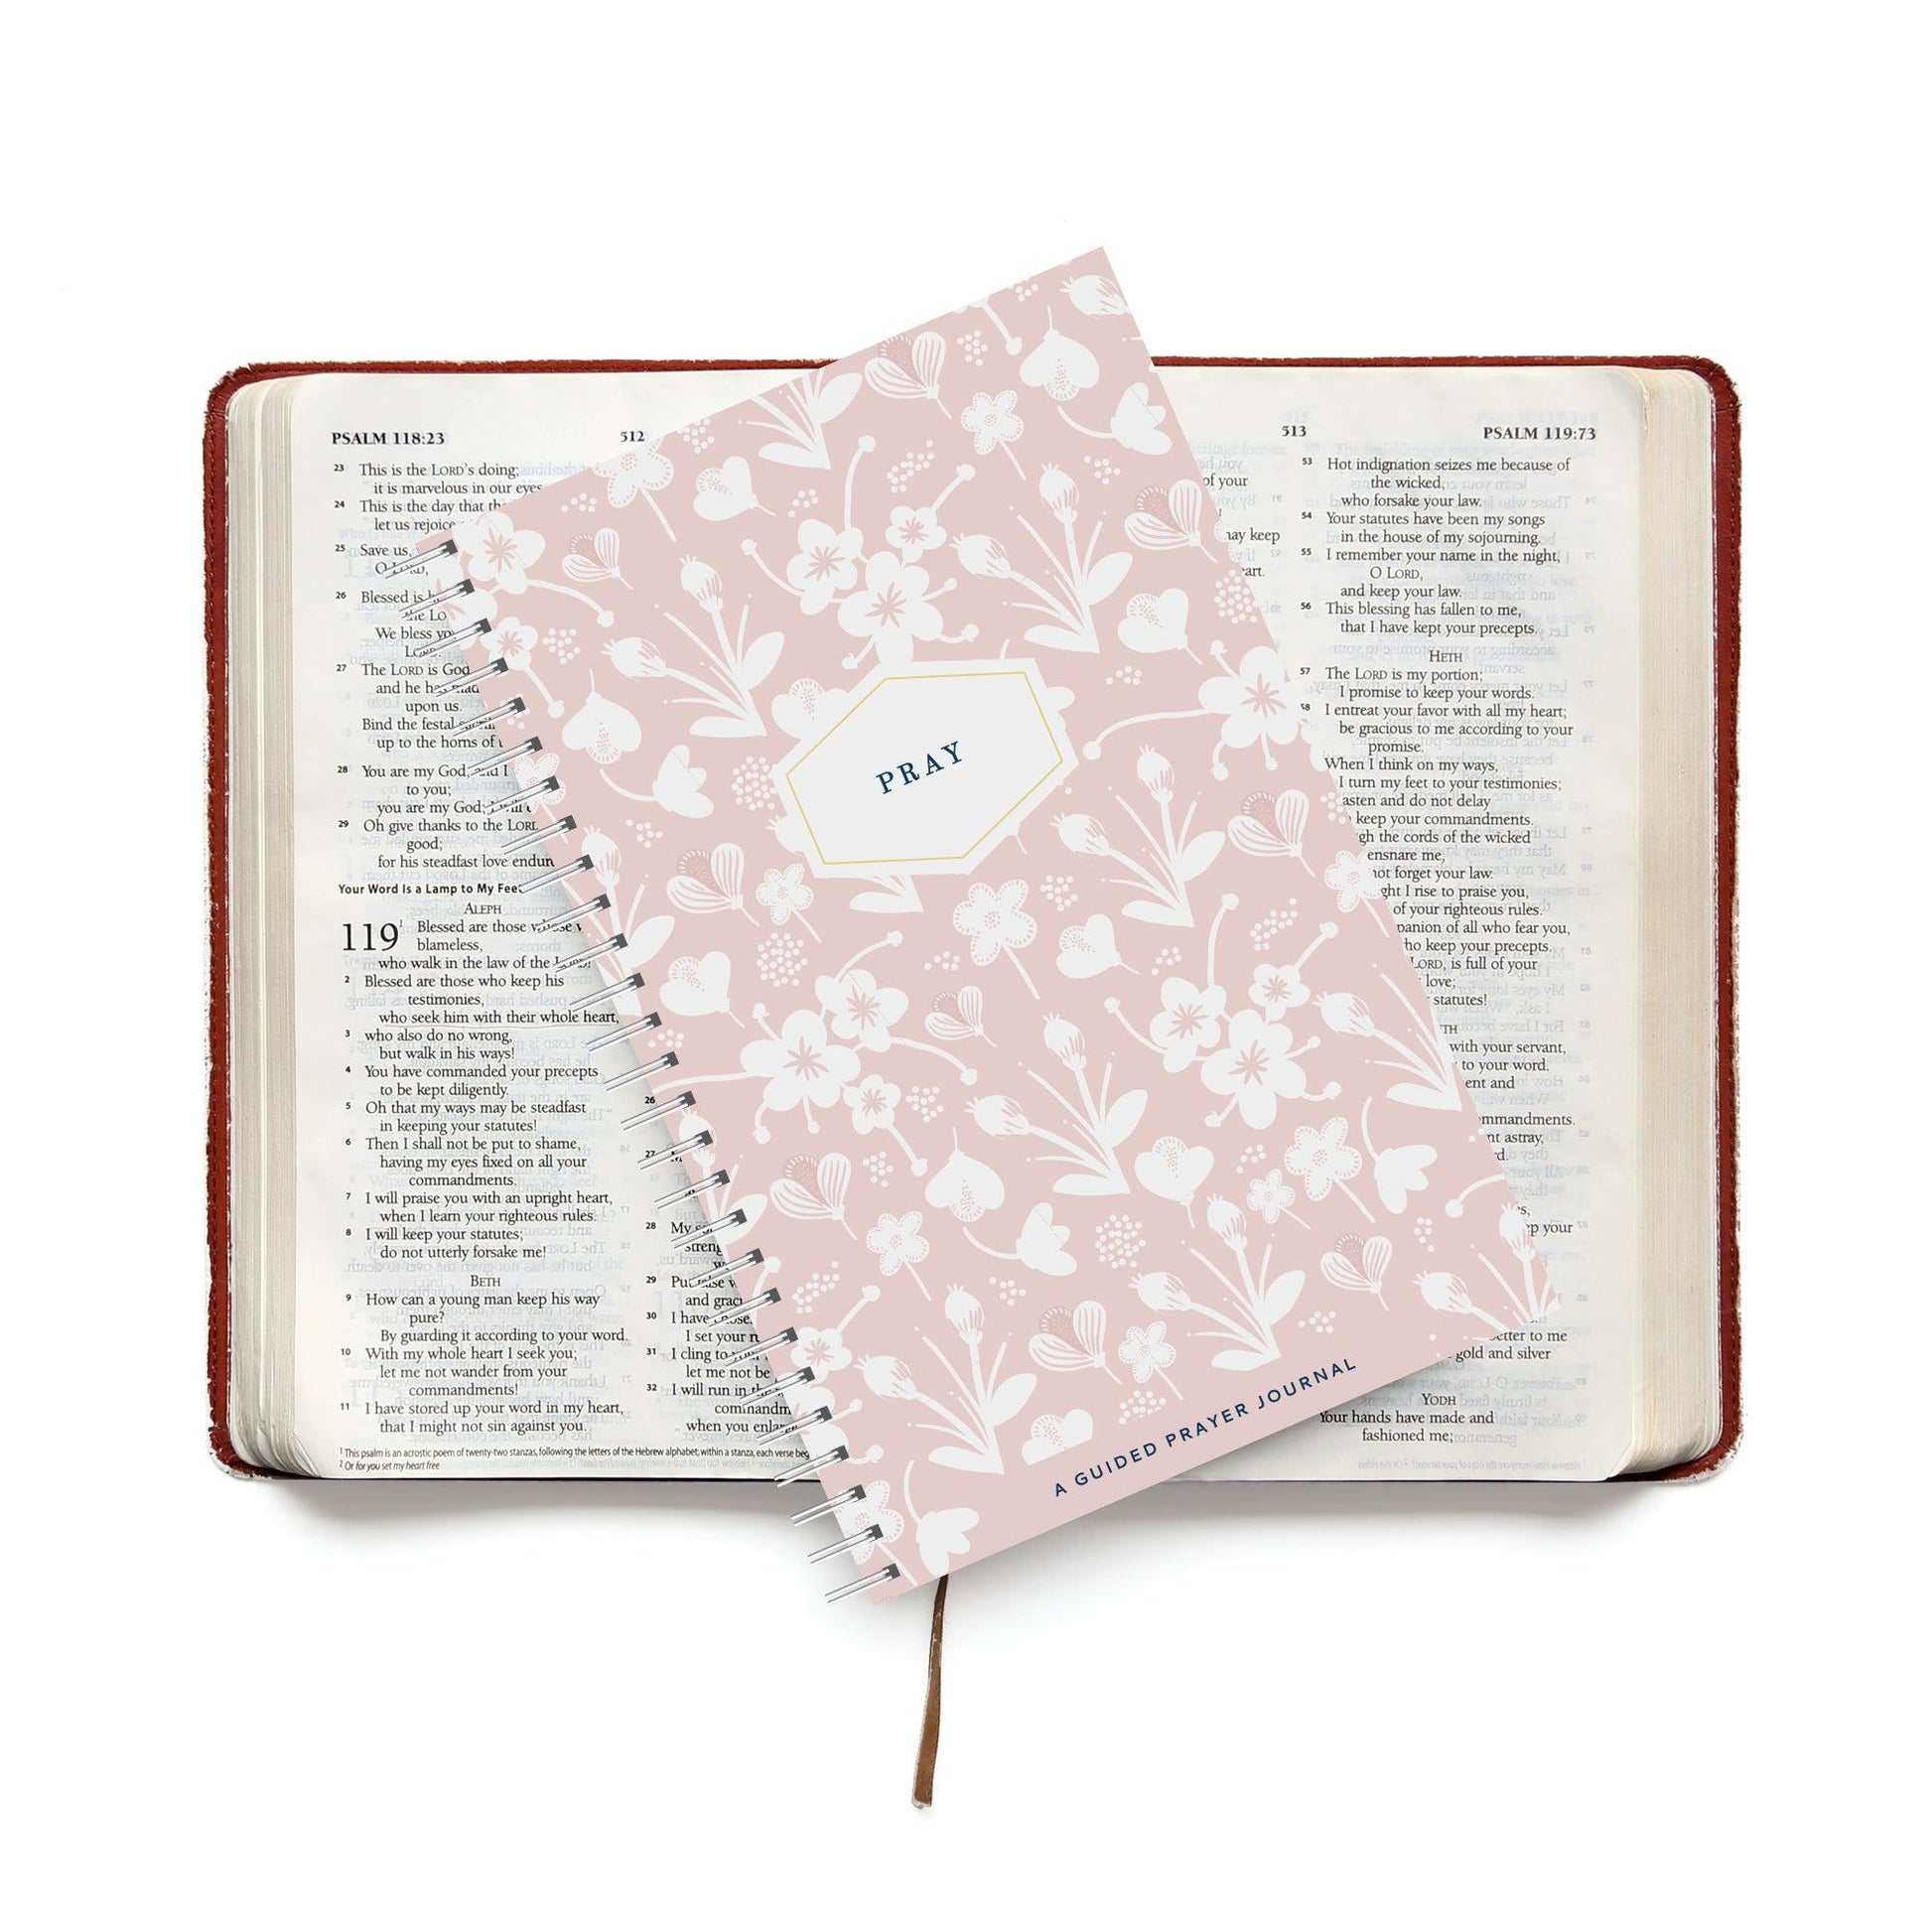 My Prayer Journal “Coffee and Bible Time” – Beautique Arie